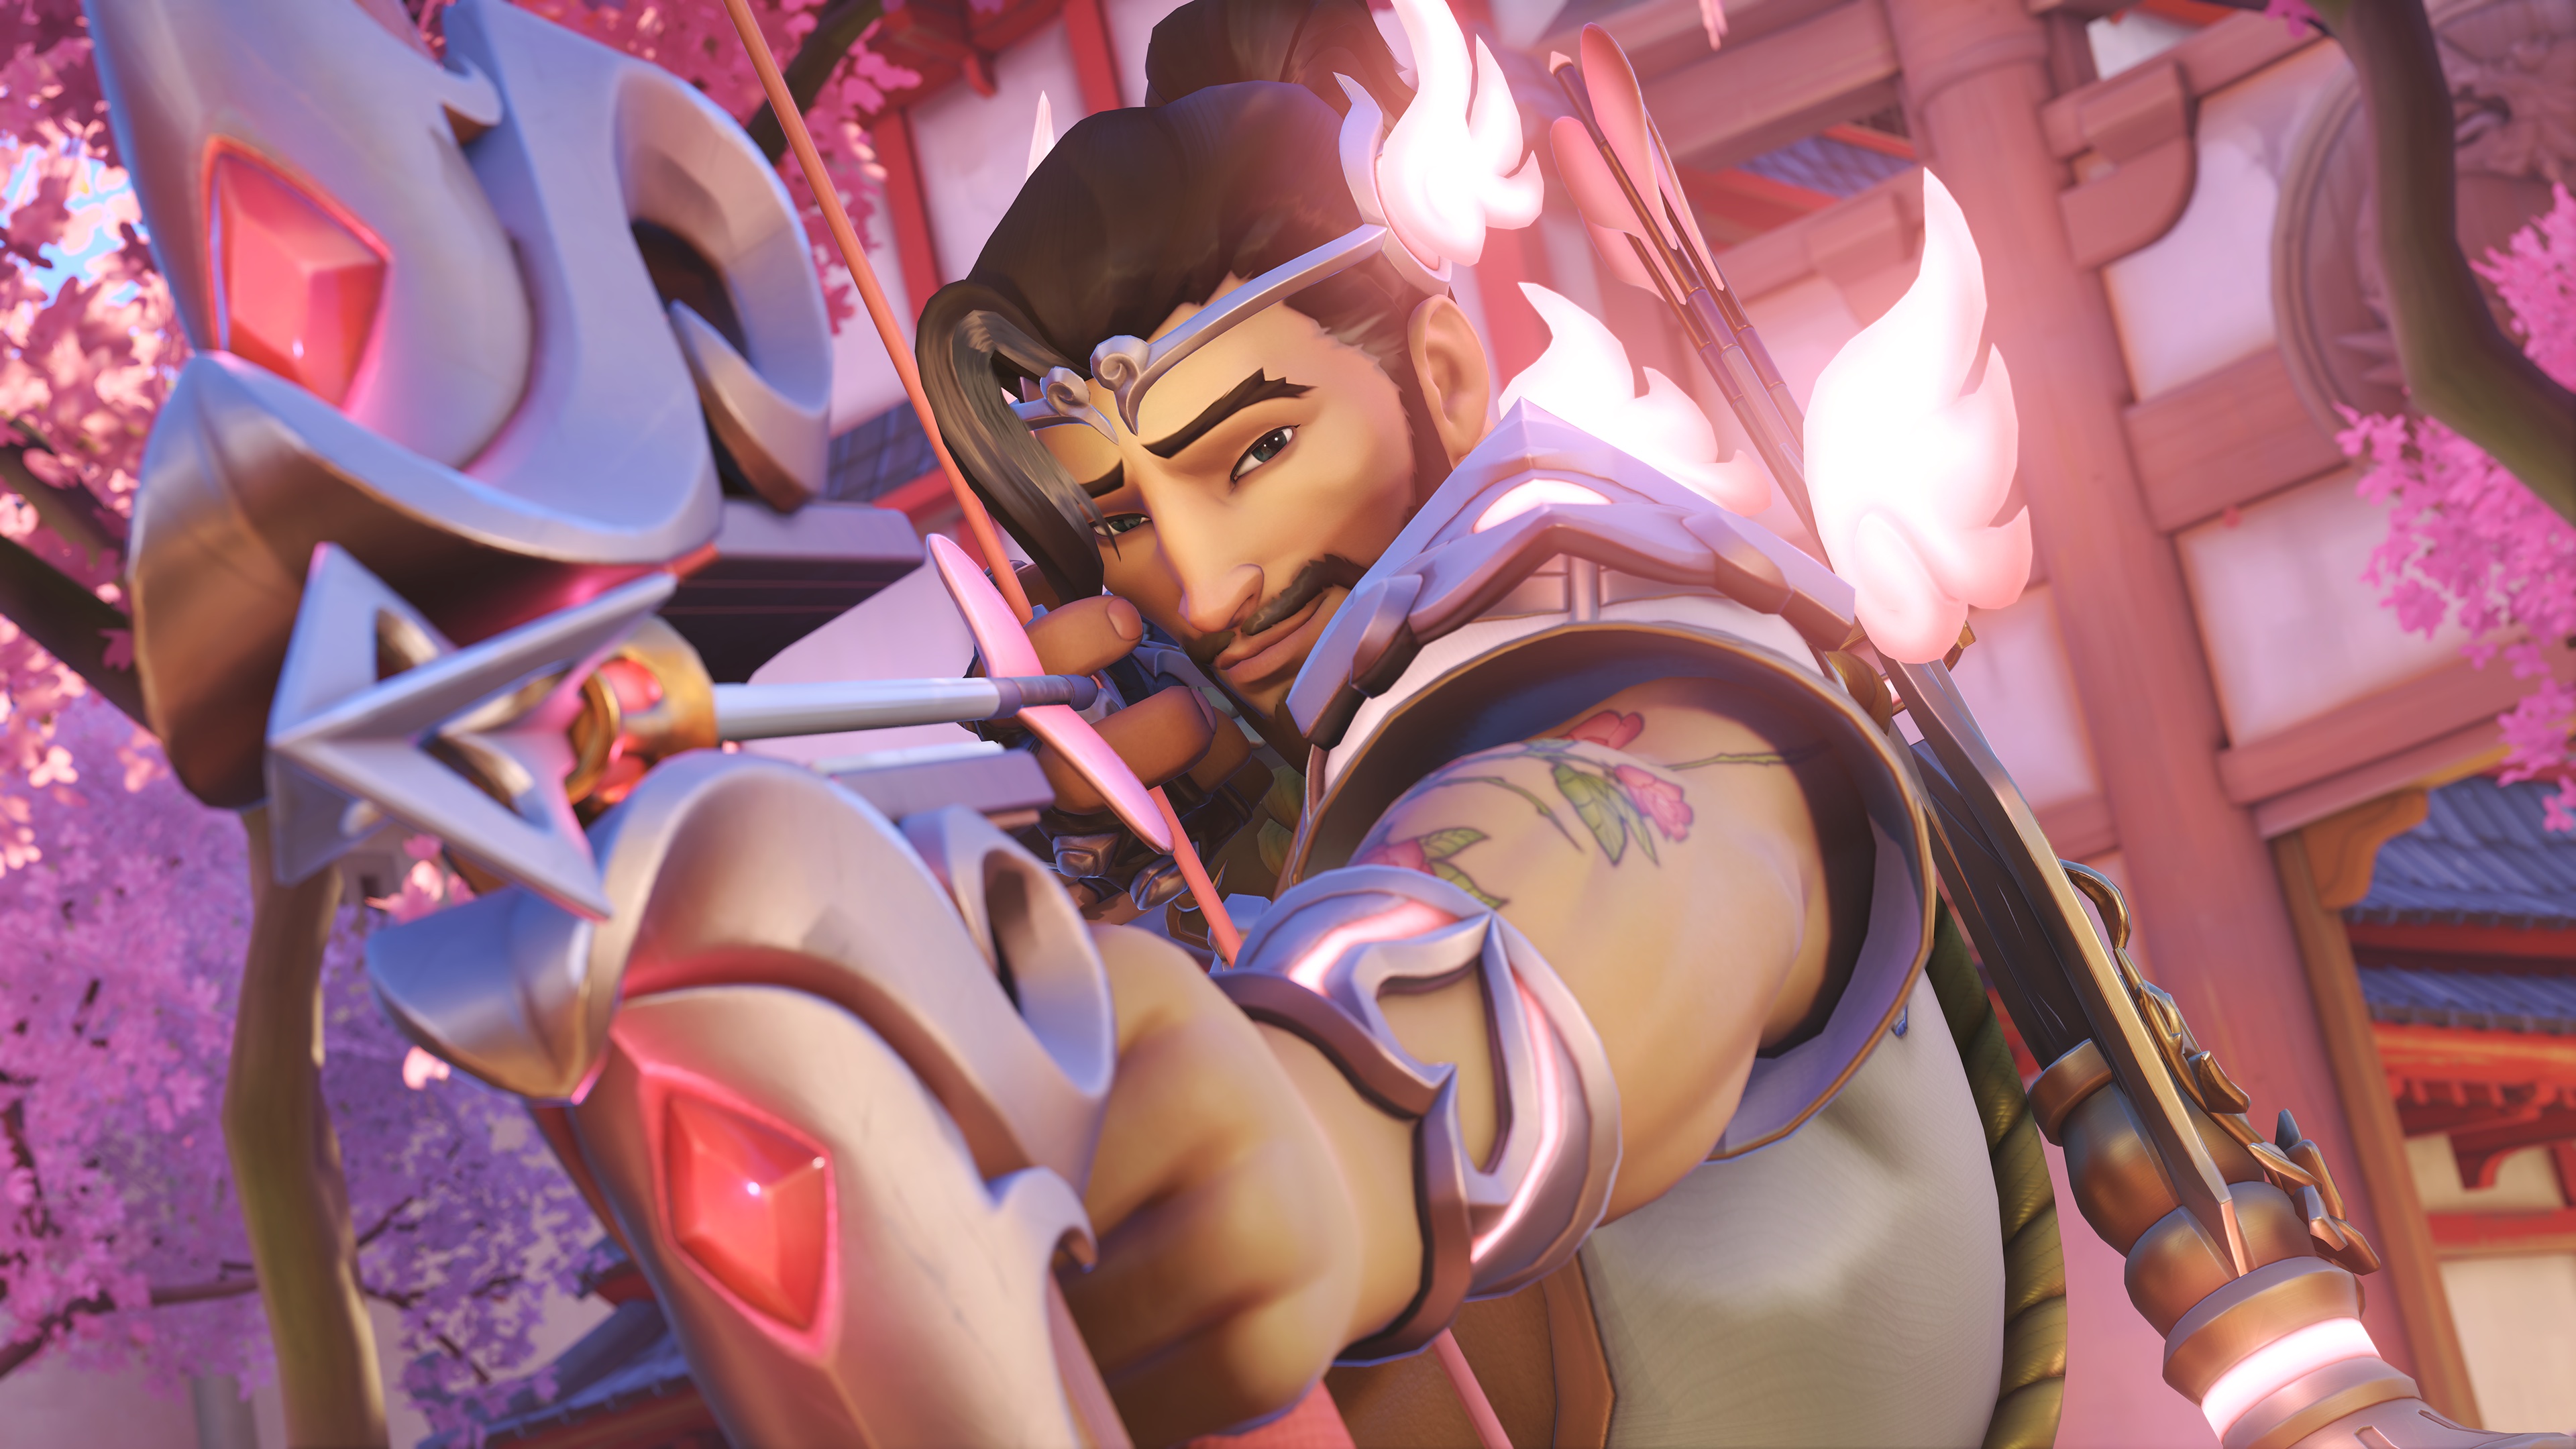 Overwatch hero Hanzo aims his bow and smirks at the camera, while wearing a Cupid-inspired skin.